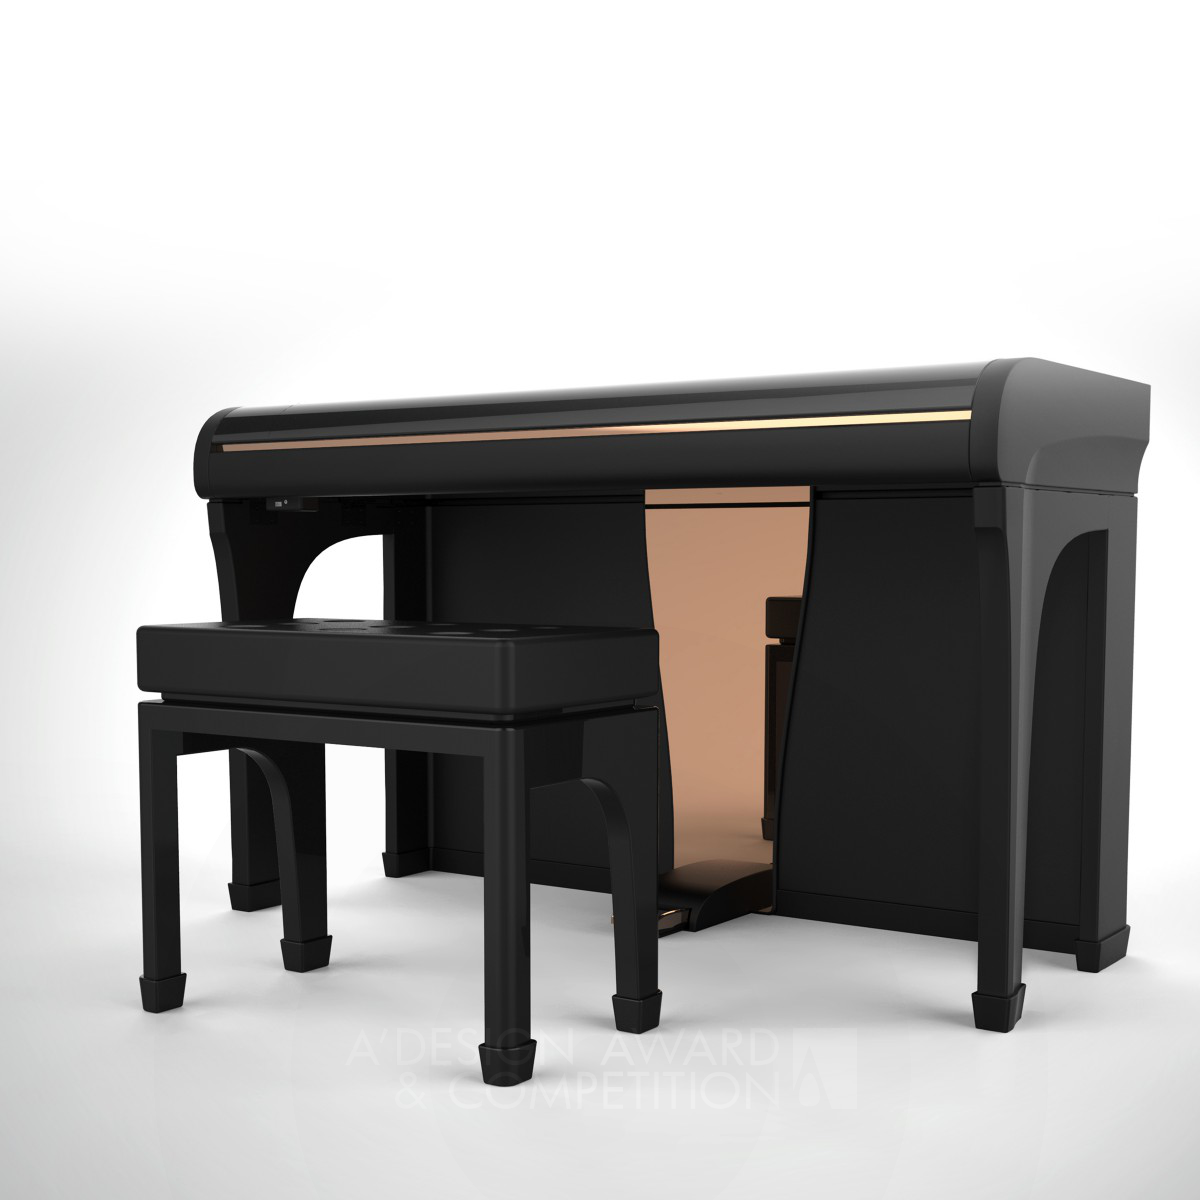 Crossway Electronic Educational Piano by LKK Innovation Design Group